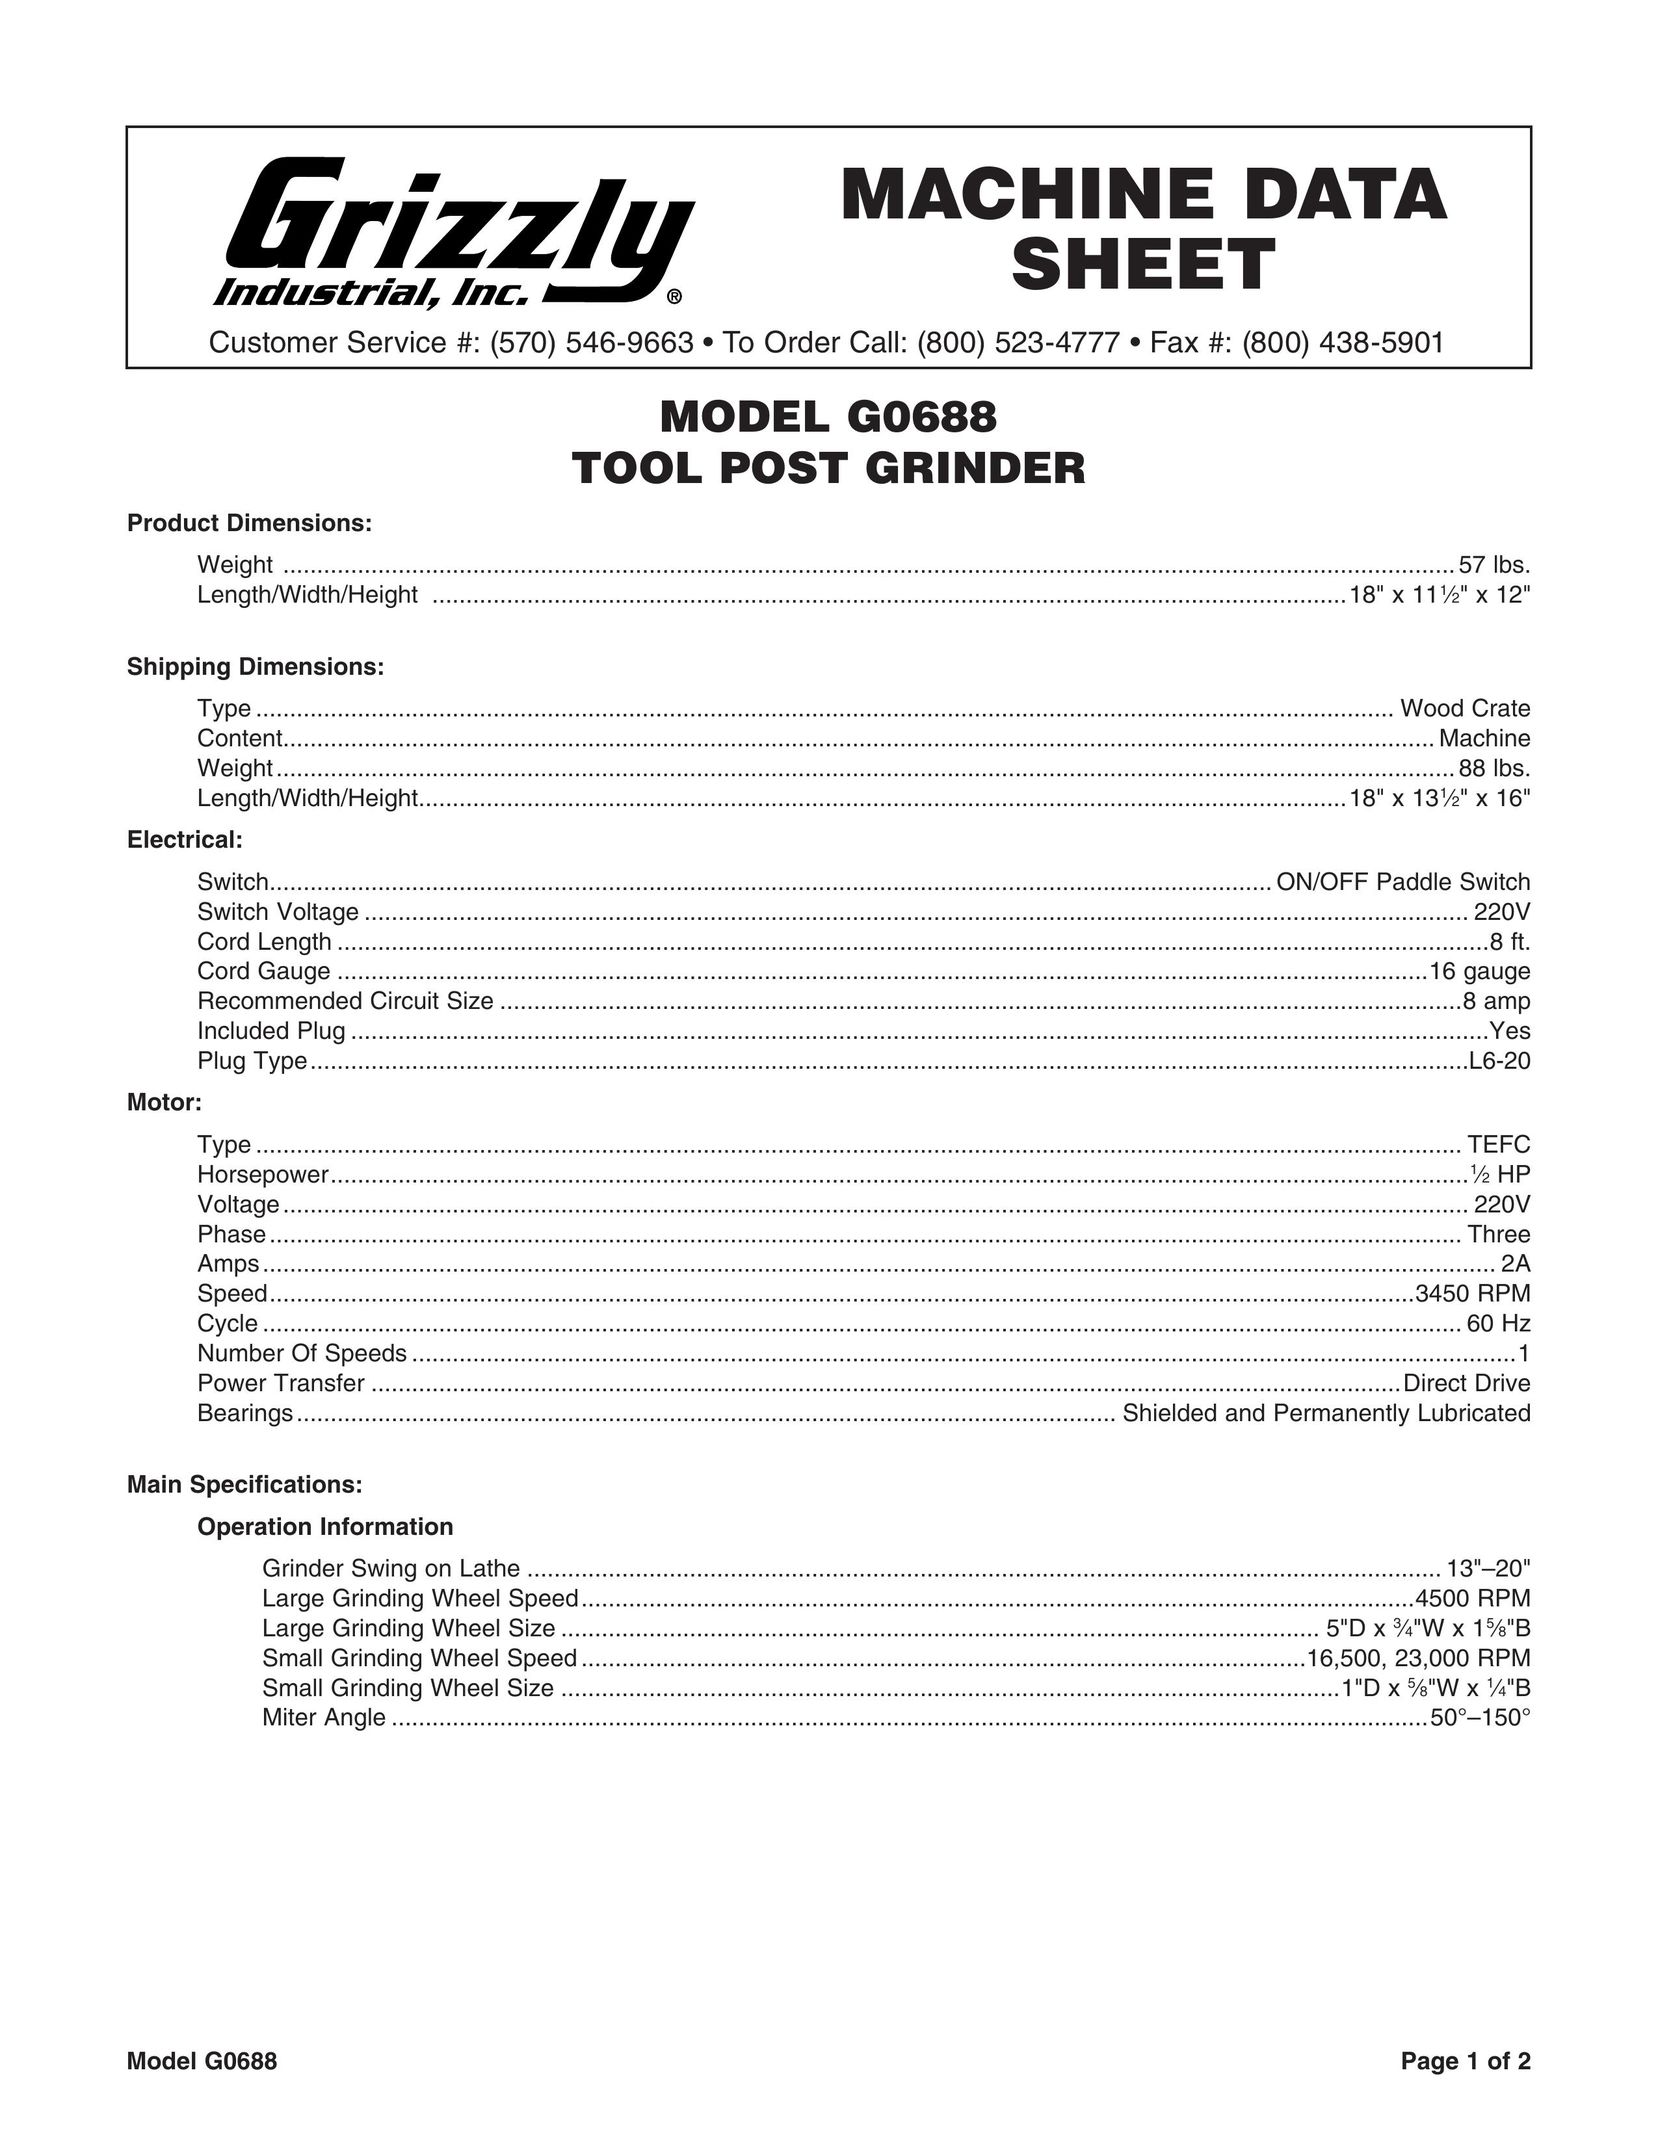 Grizzly D2X Grinder User Manual